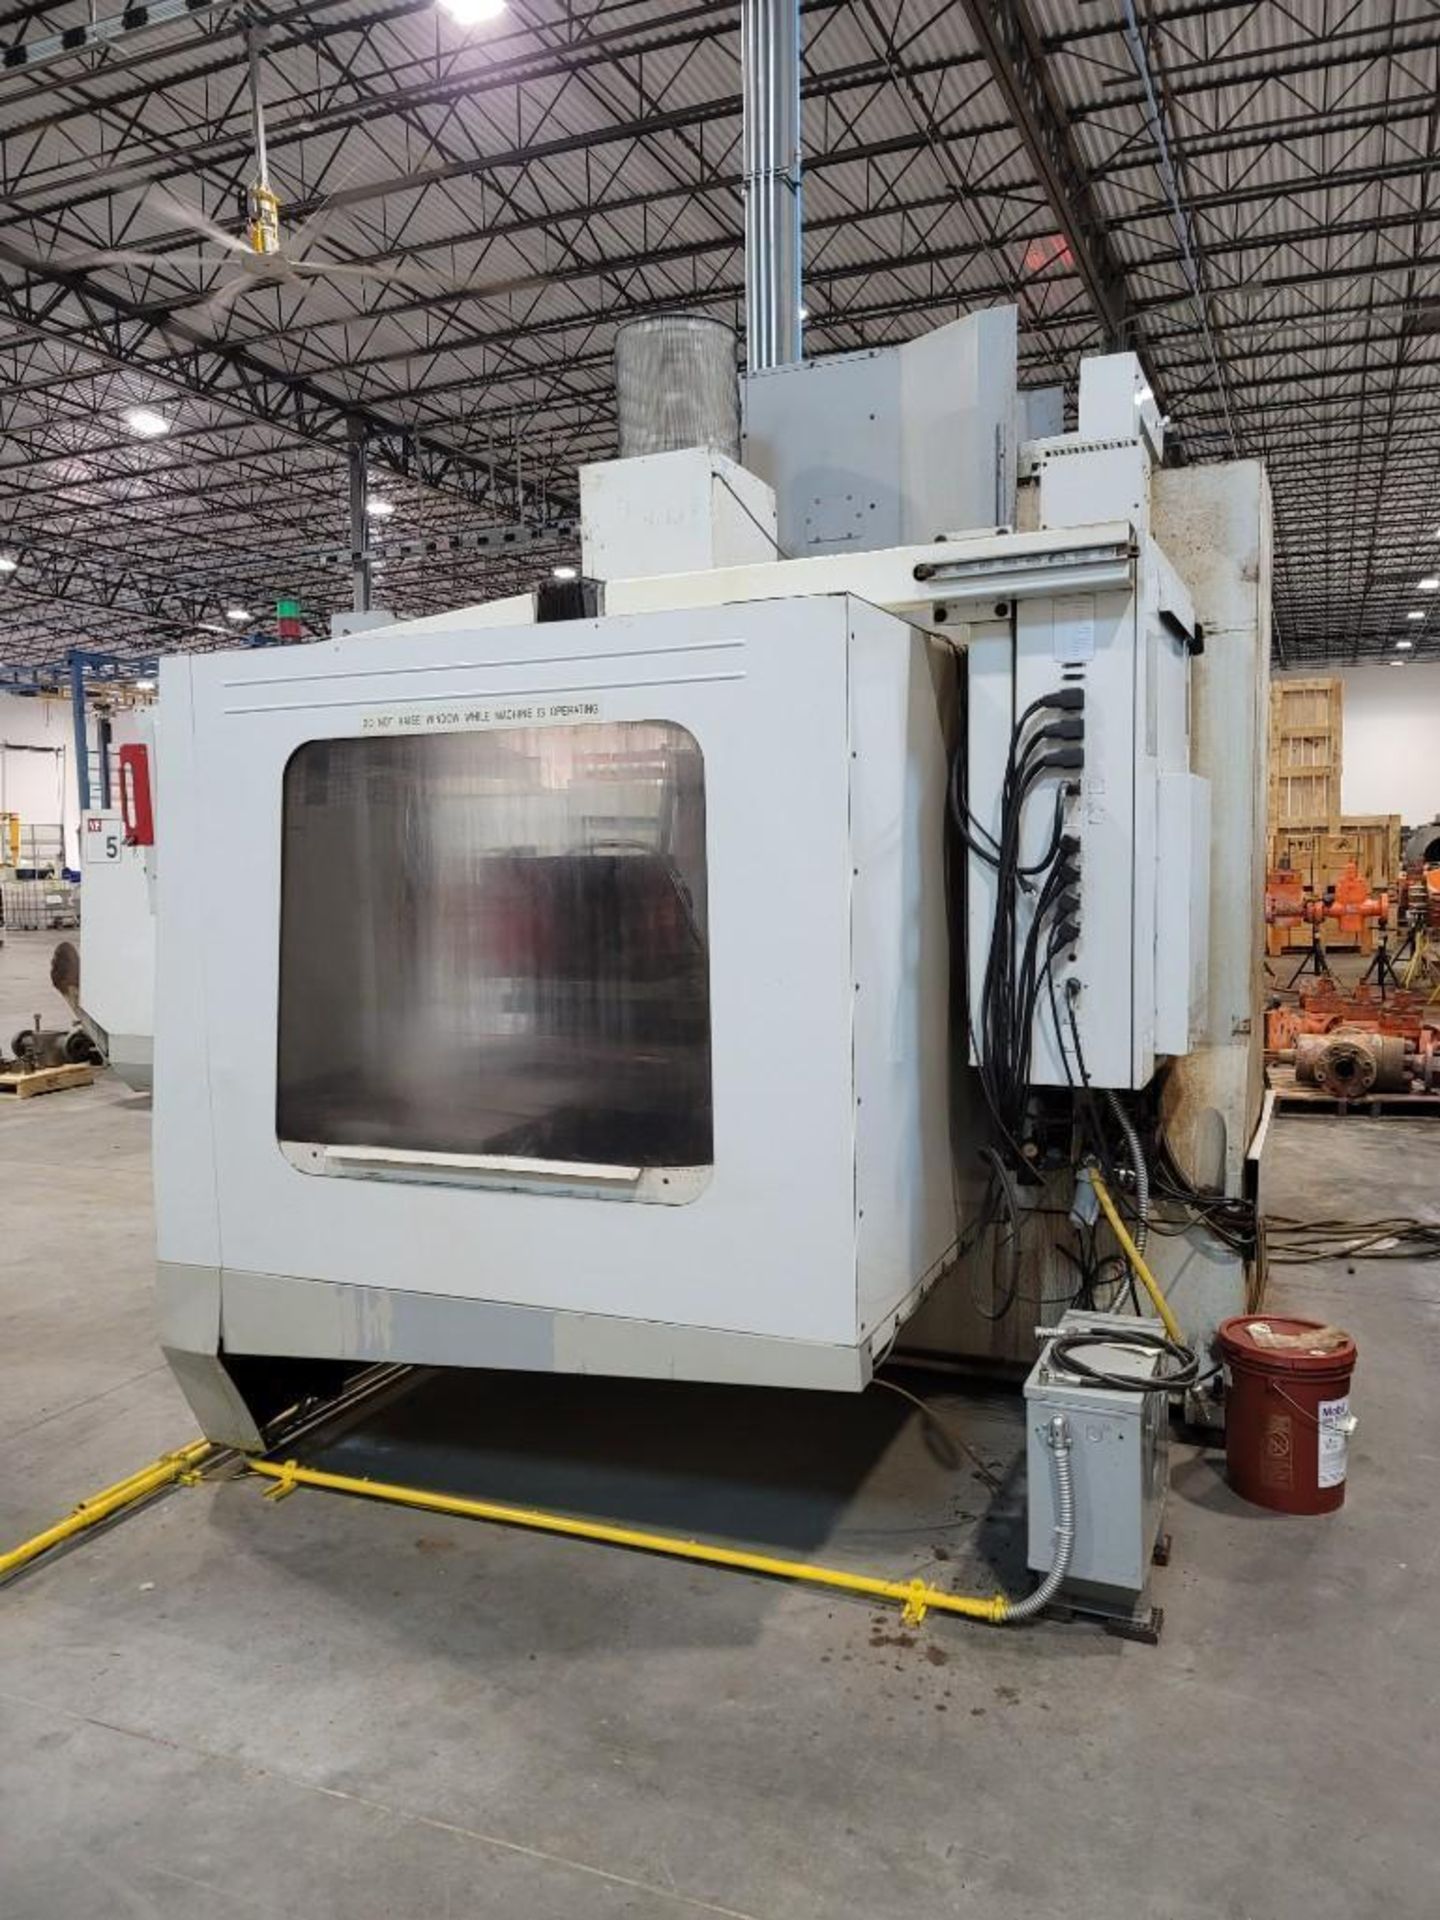 Haas VF-6 CNC Vertical Machining Center - Image 14 of 15